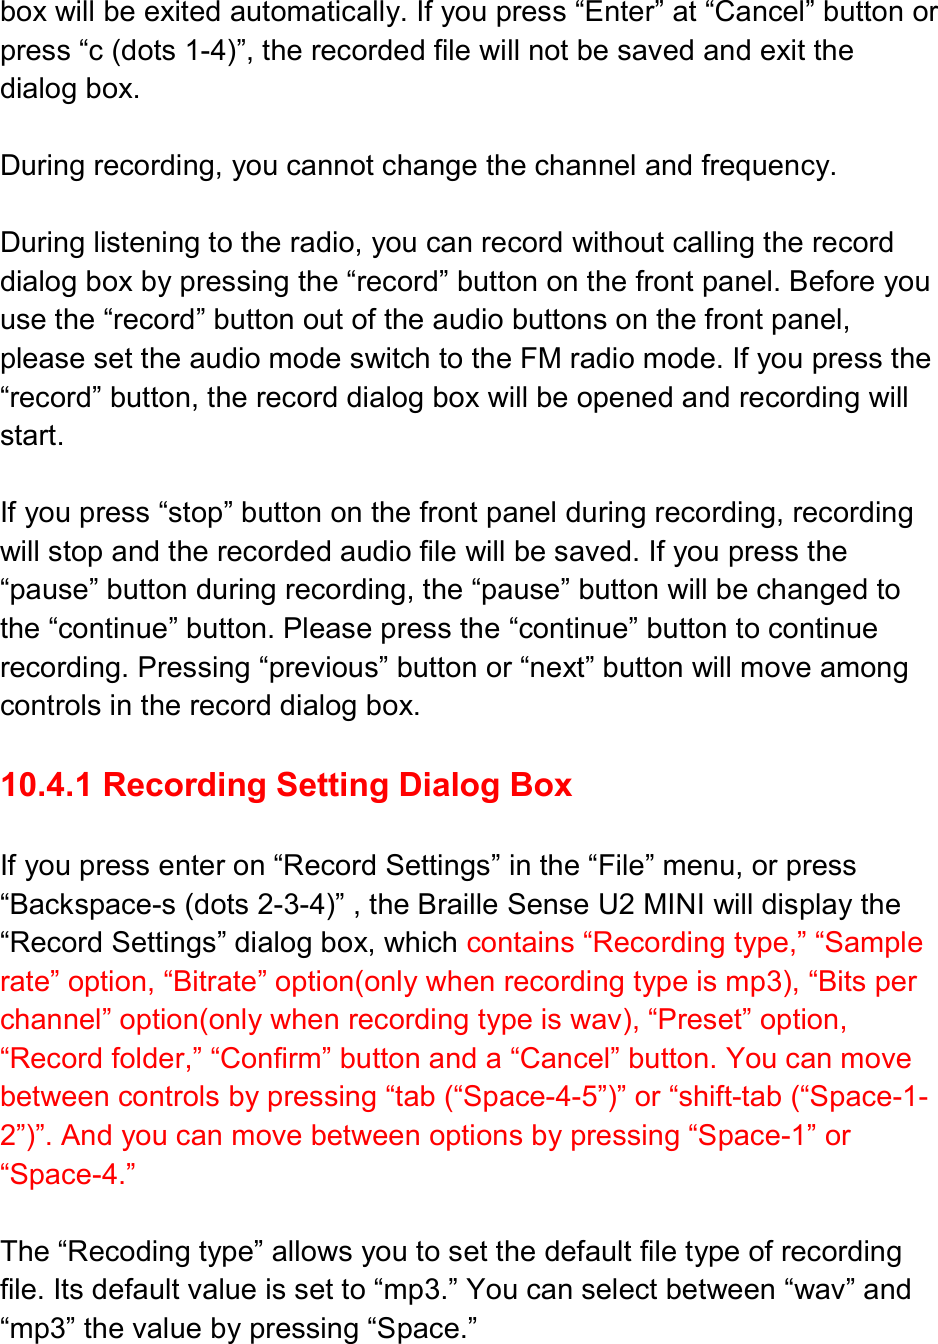  box will be exited automatically. If you press “Enter” at “Cancel” button or press “c (dots 1-4)”, the recorded file will not be saved and exit the dialog box.    During recording, you cannot change the channel and frequency.  During listening to the radio, you can record without calling the record dialog box by pressing the “record” button on the front panel. Before you use the “record” button out of the audio buttons on the front panel, please set the audio mode switch to the FM radio mode. If you press the “record” button, the record dialog box will be opened and recording will start.  If you press “stop” button on the front panel during recording, recording will stop and the recorded audio file will be saved. If you press the “pause” button during recording, the “pause” button will be changed to the “continue” button. Please press the “continue” button to continue recording. Pressing “previous” button or “next” button will move among controls in the record dialog box.  10.4.1 Recording Setting Dialog Box  If you press enter on “Record Settings” in the “File” menu, or press “Backspace-s (dots 2-3-4)” , the Braille Sense U2 MINI will display the “Record Settings” dialog box, which contains “Recording type,” “Sample rate” option, “Bitrate” option(only when recording type is mp3), “Bits per channel” option(only when recording type is wav), “Preset” option, “Record folder,” “Confirm” button and a “Cancel” button. You can move between controls by pressing “tab (“Space-4-5”)” or “shift-tab (“Space-1-2”)”. And you can move between options by pressing “Space-1” or “Space-4.”  The “Recoding type” allows you to set the default file type of recording file. Its default value is set to “mp3.” You can select between “wav” and “mp3” the value by pressing “Space.”  